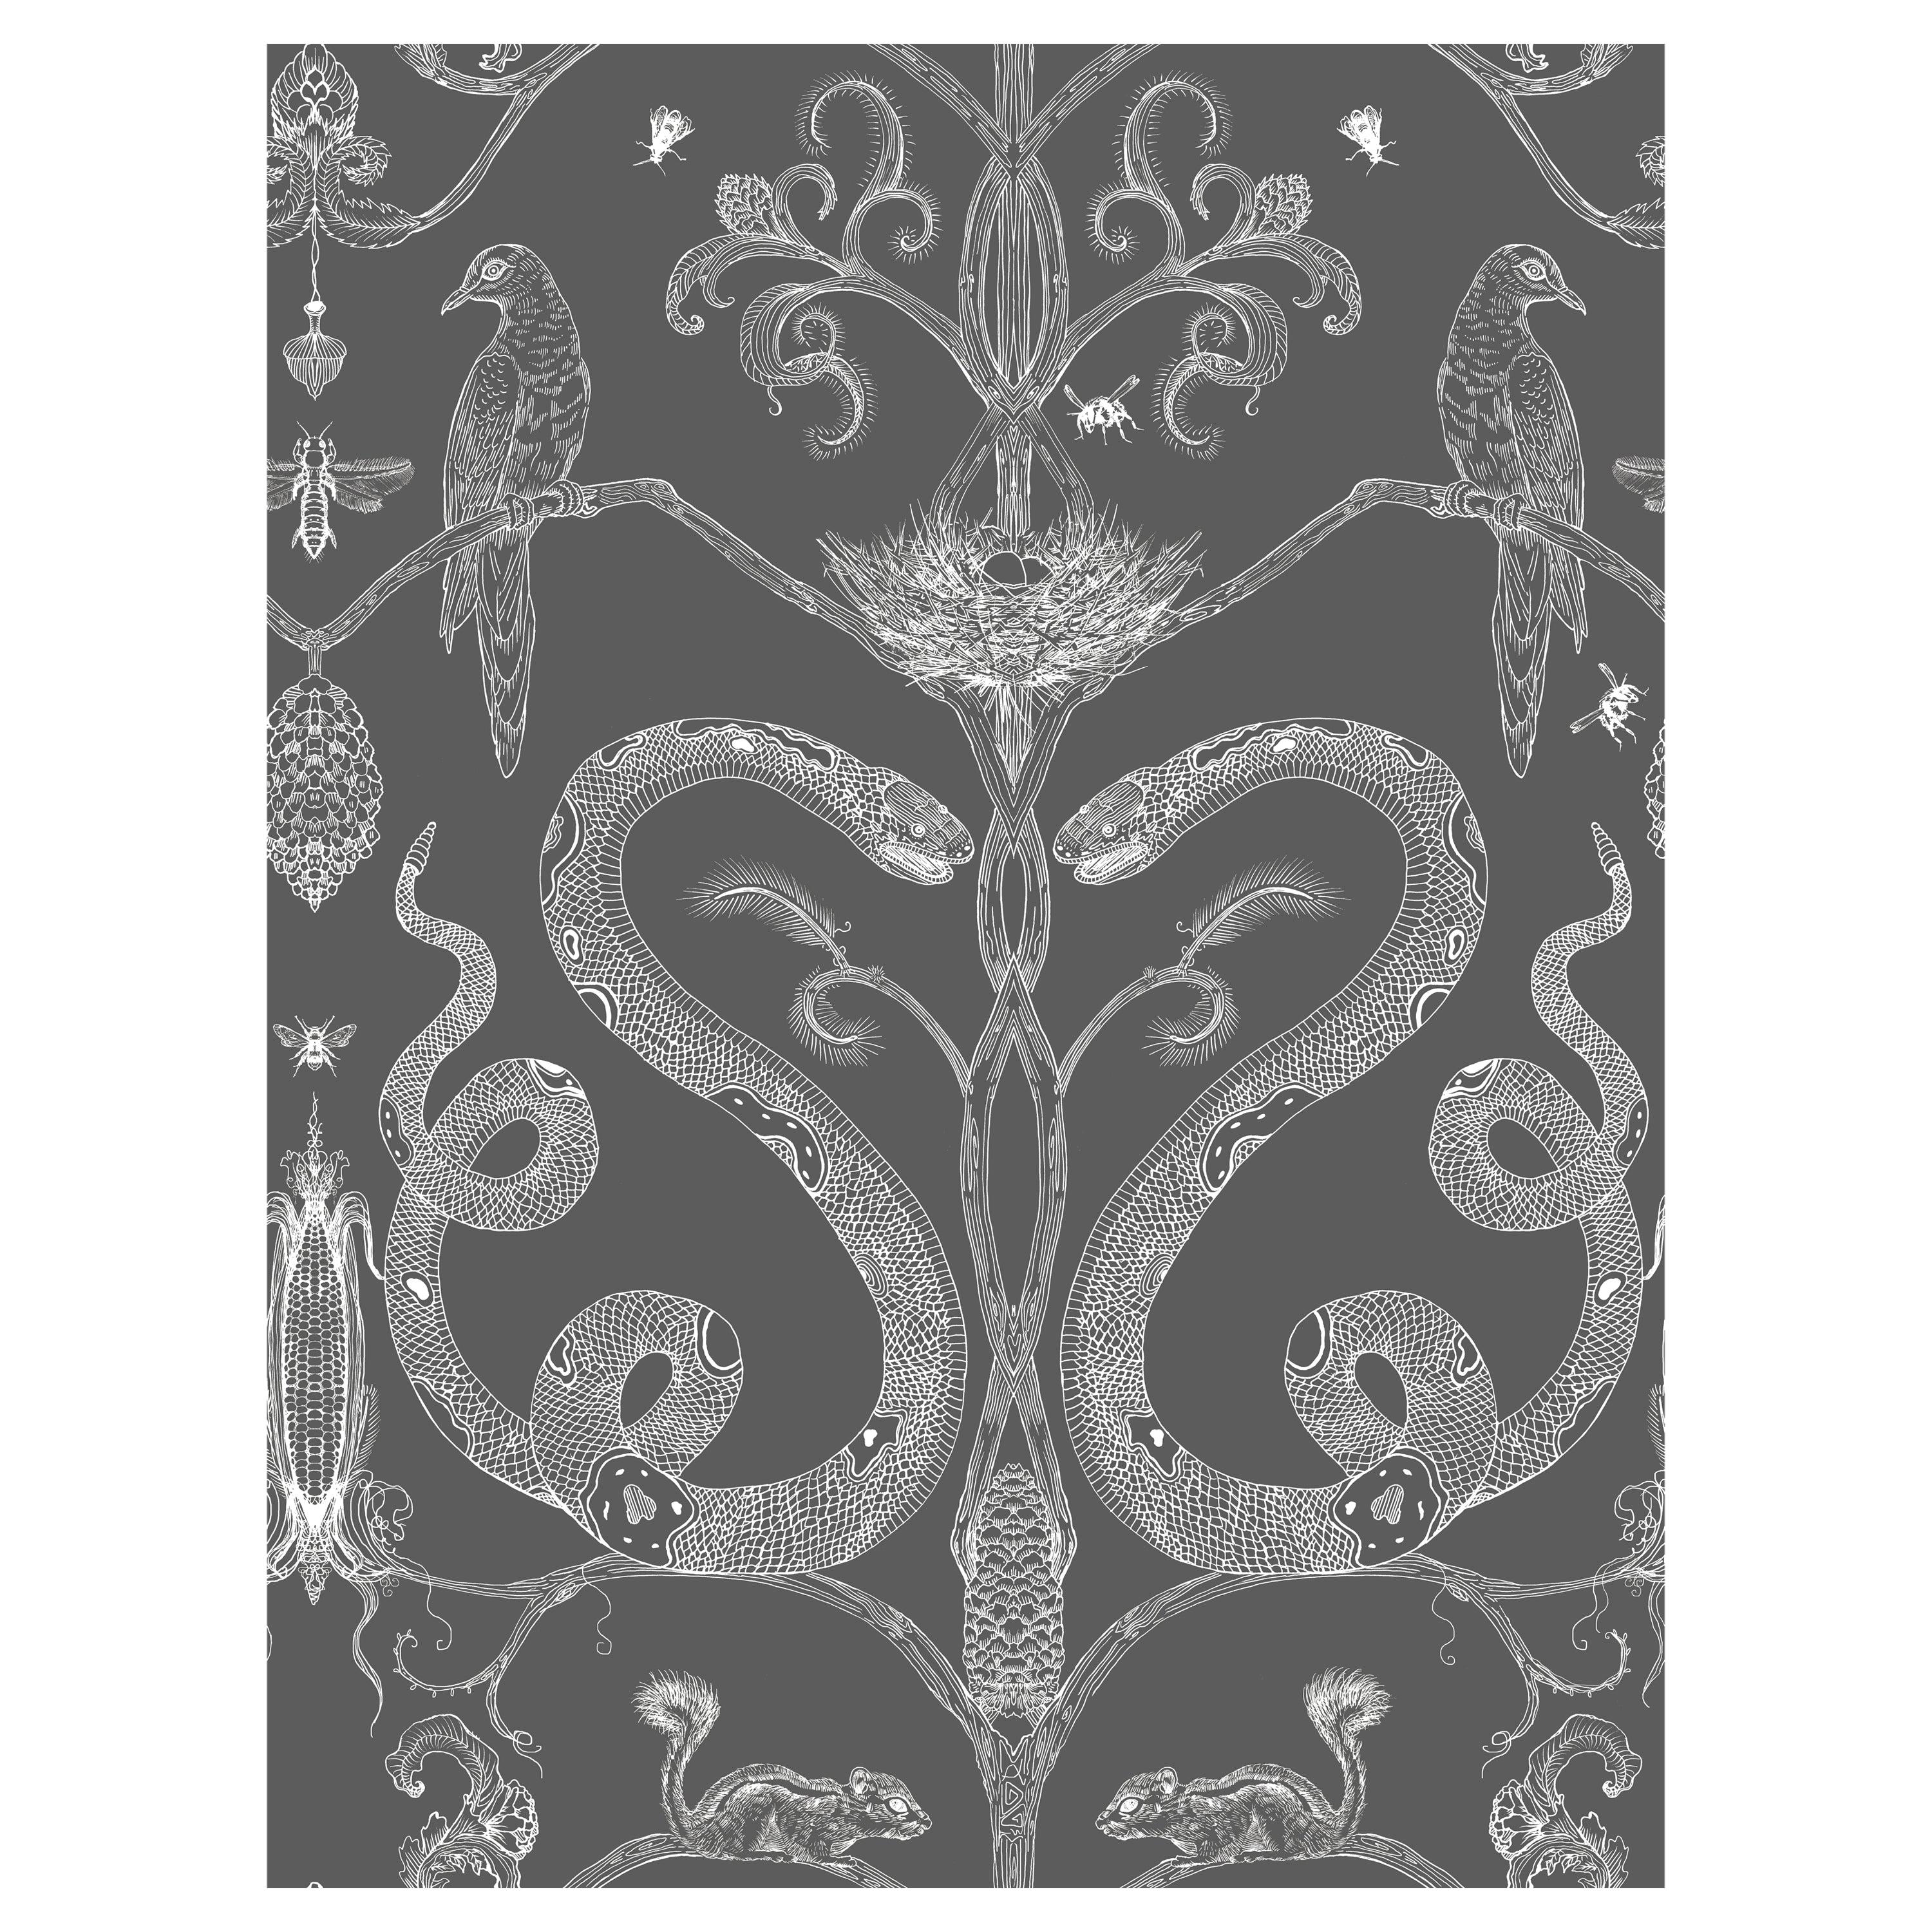 Snake Party in Charcoal-Smooth Wallpaper with Hand Drawn Animals For Sale